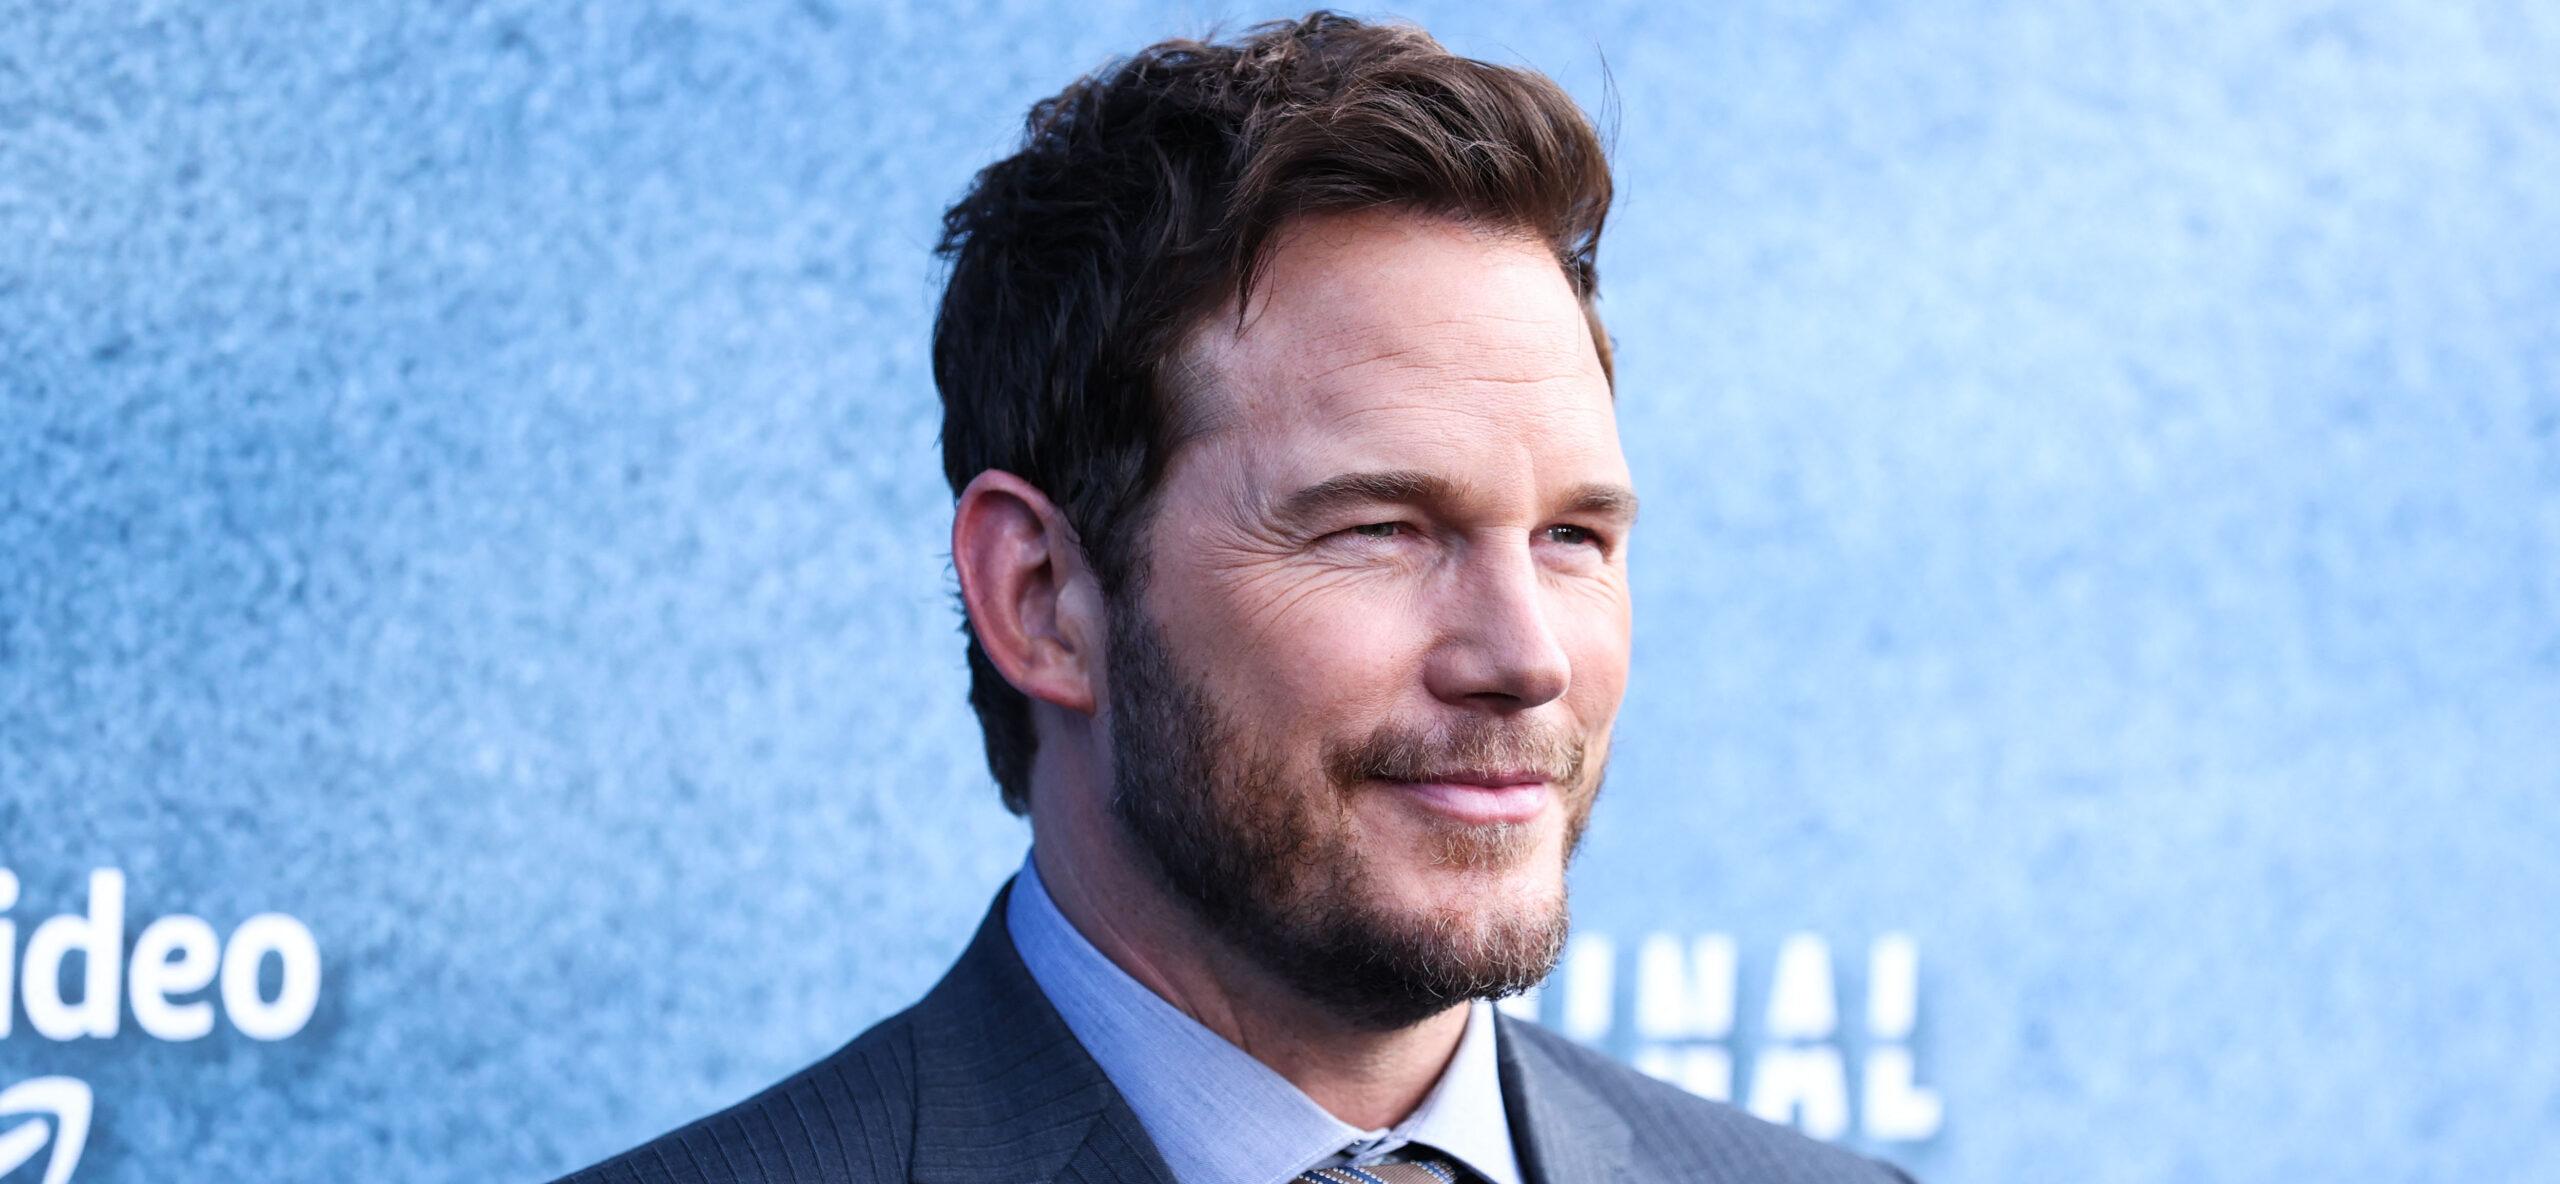 A video of Chris Pratt rapping an Eminem song is resurfacing, and the 'Guardians of the Galaxy' actor is reacting.